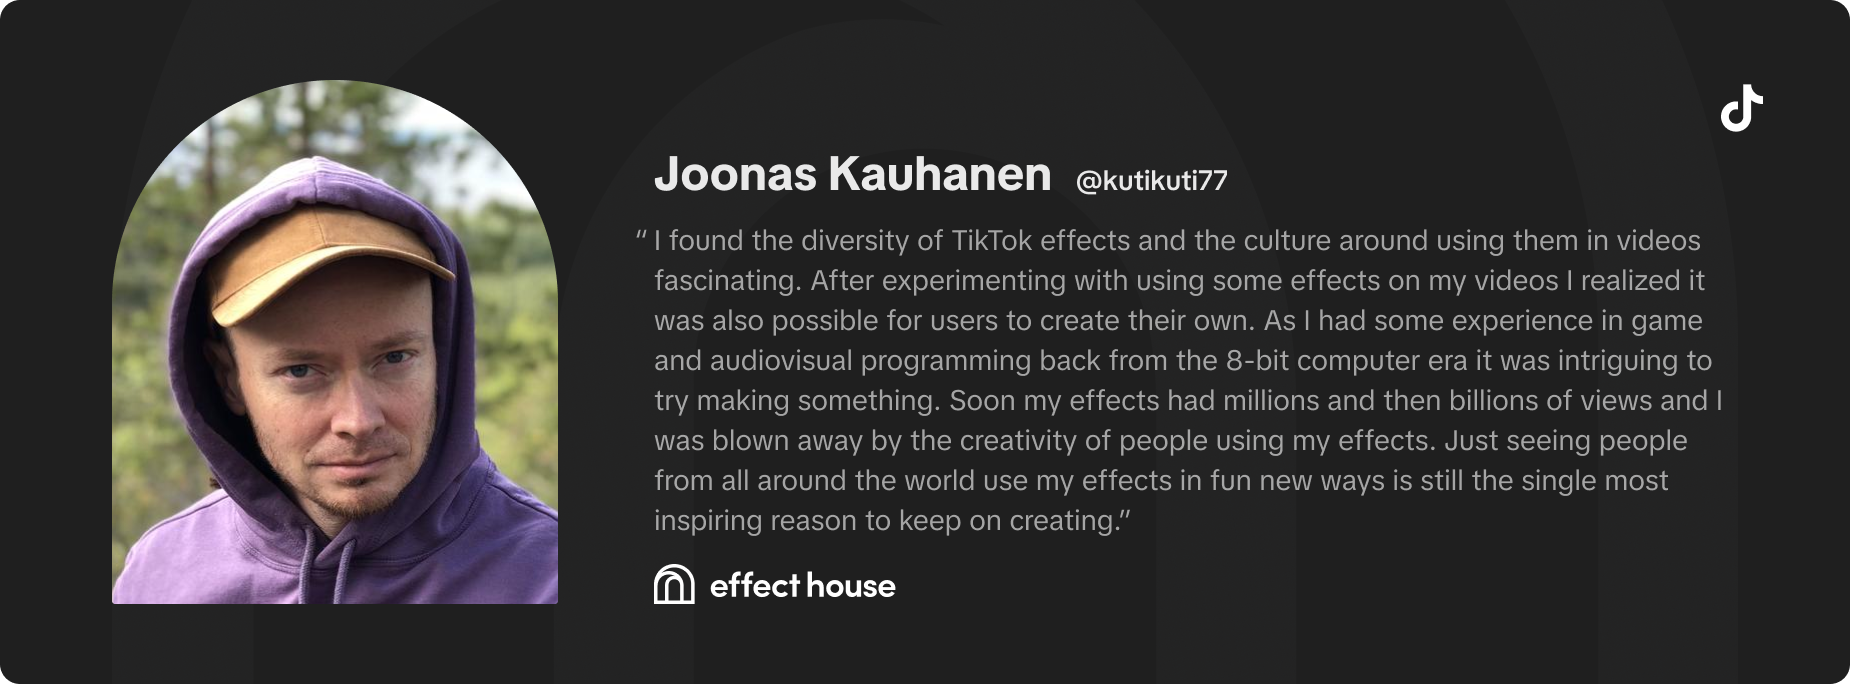 I found the diversity of TikTok effects and the culture around using them in videos fascinating. After experimenting with using some effects on my videos I realized it was also possible for users to create their own. As I had some experience in gaming and audiovisual programming back from the 8-bit computer era it was intriguing to try making something. Soon my effects had millions and then billions of views and I was blown away by the creativity of people using my effects. Just seeing people from all around the world use my effects in fun new ways is still the single most inspiring reason to keep on creating. -Joonas Kauhanen (kutikuti77)